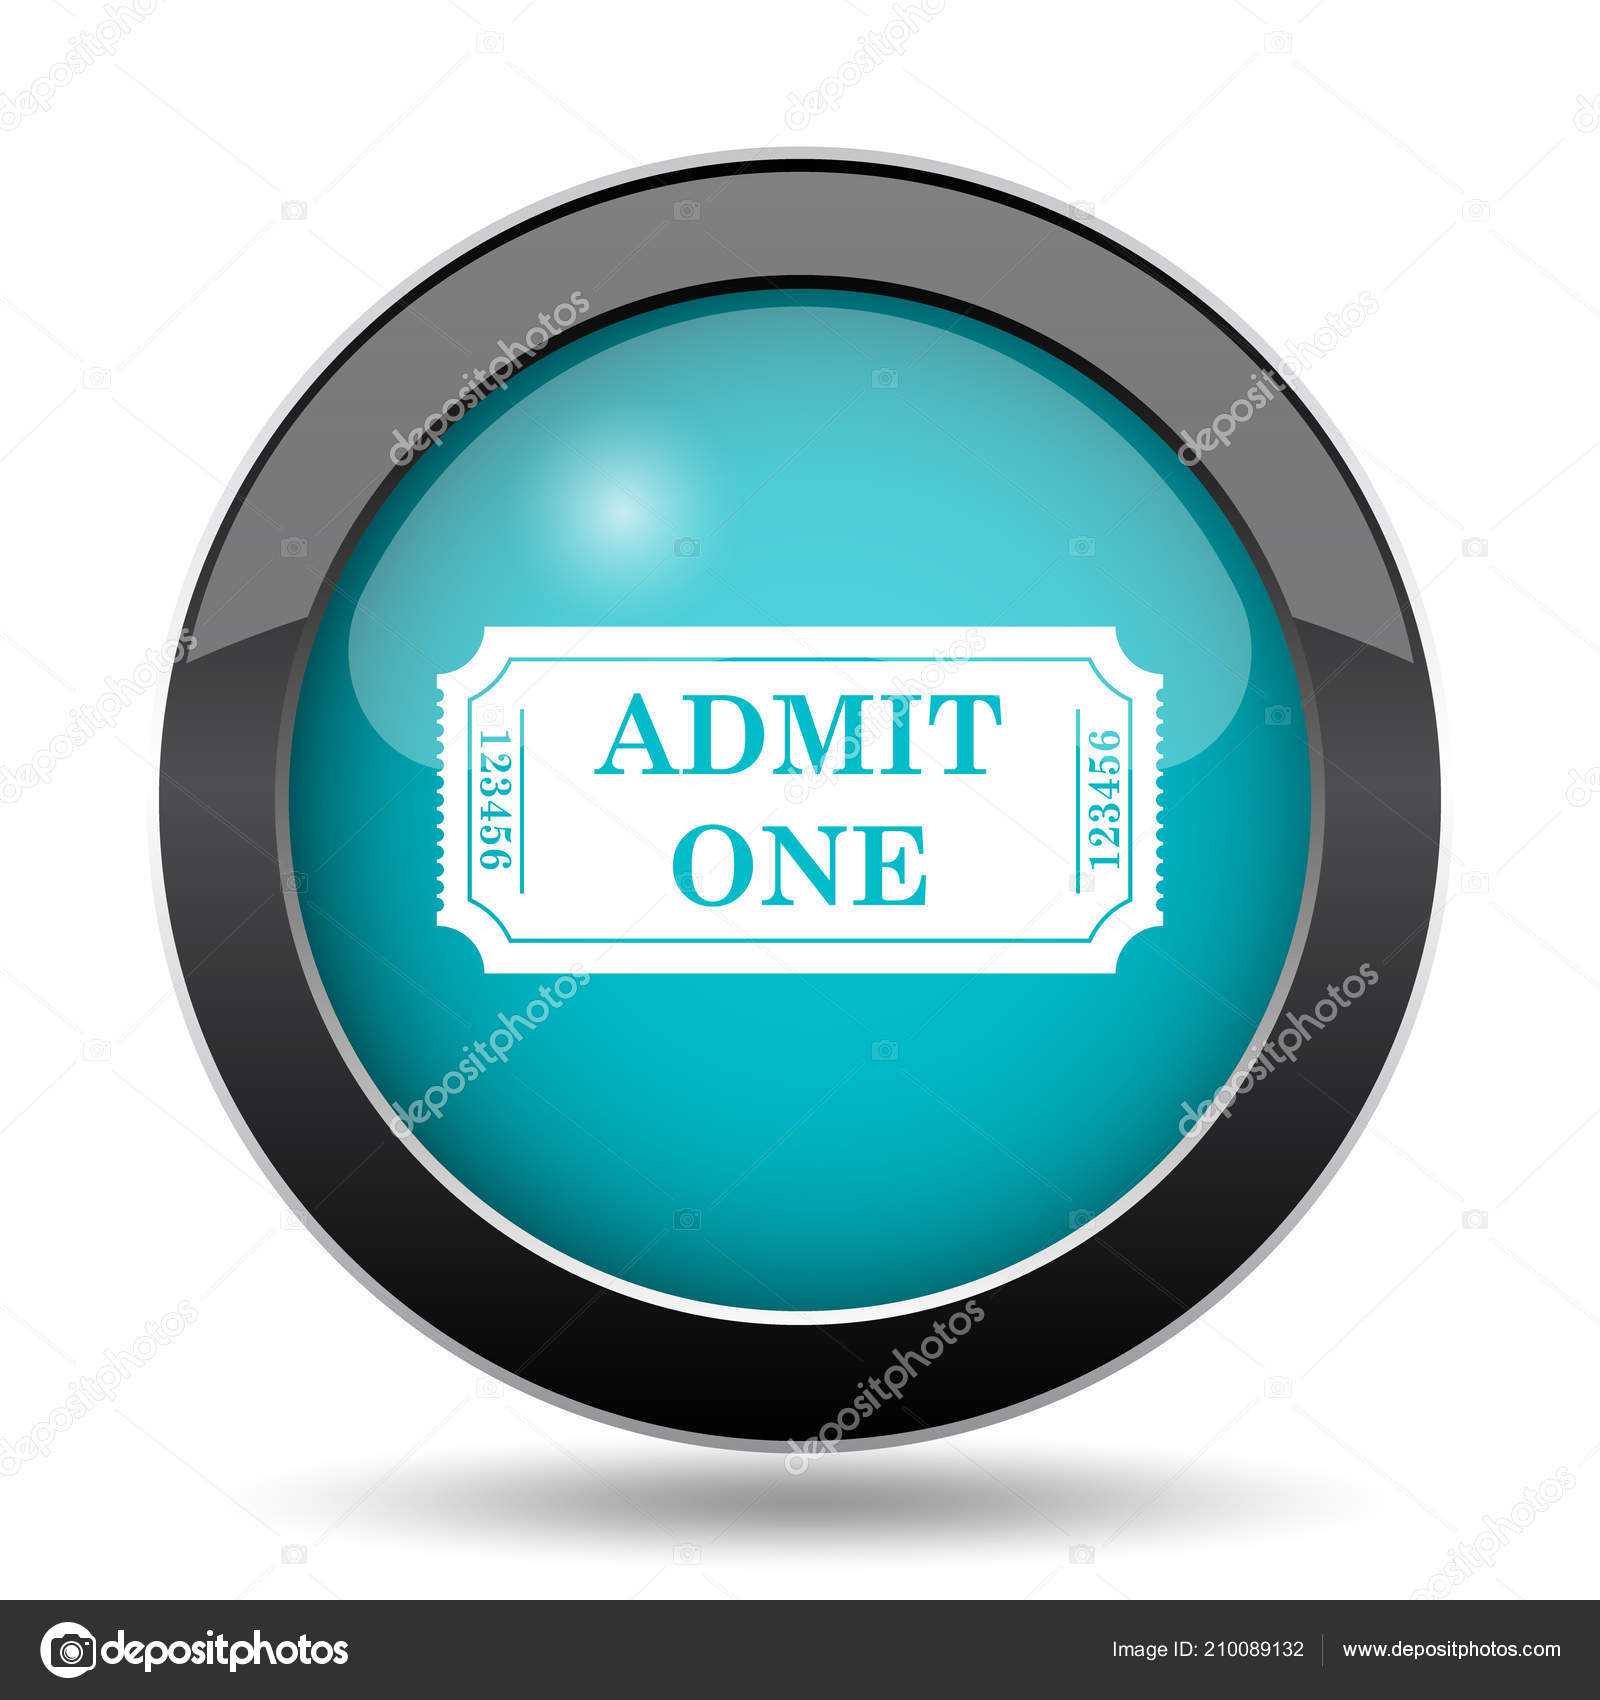 Images Admin Hd Admin One Ticket Icon Stock Photo C Valentint 210089132